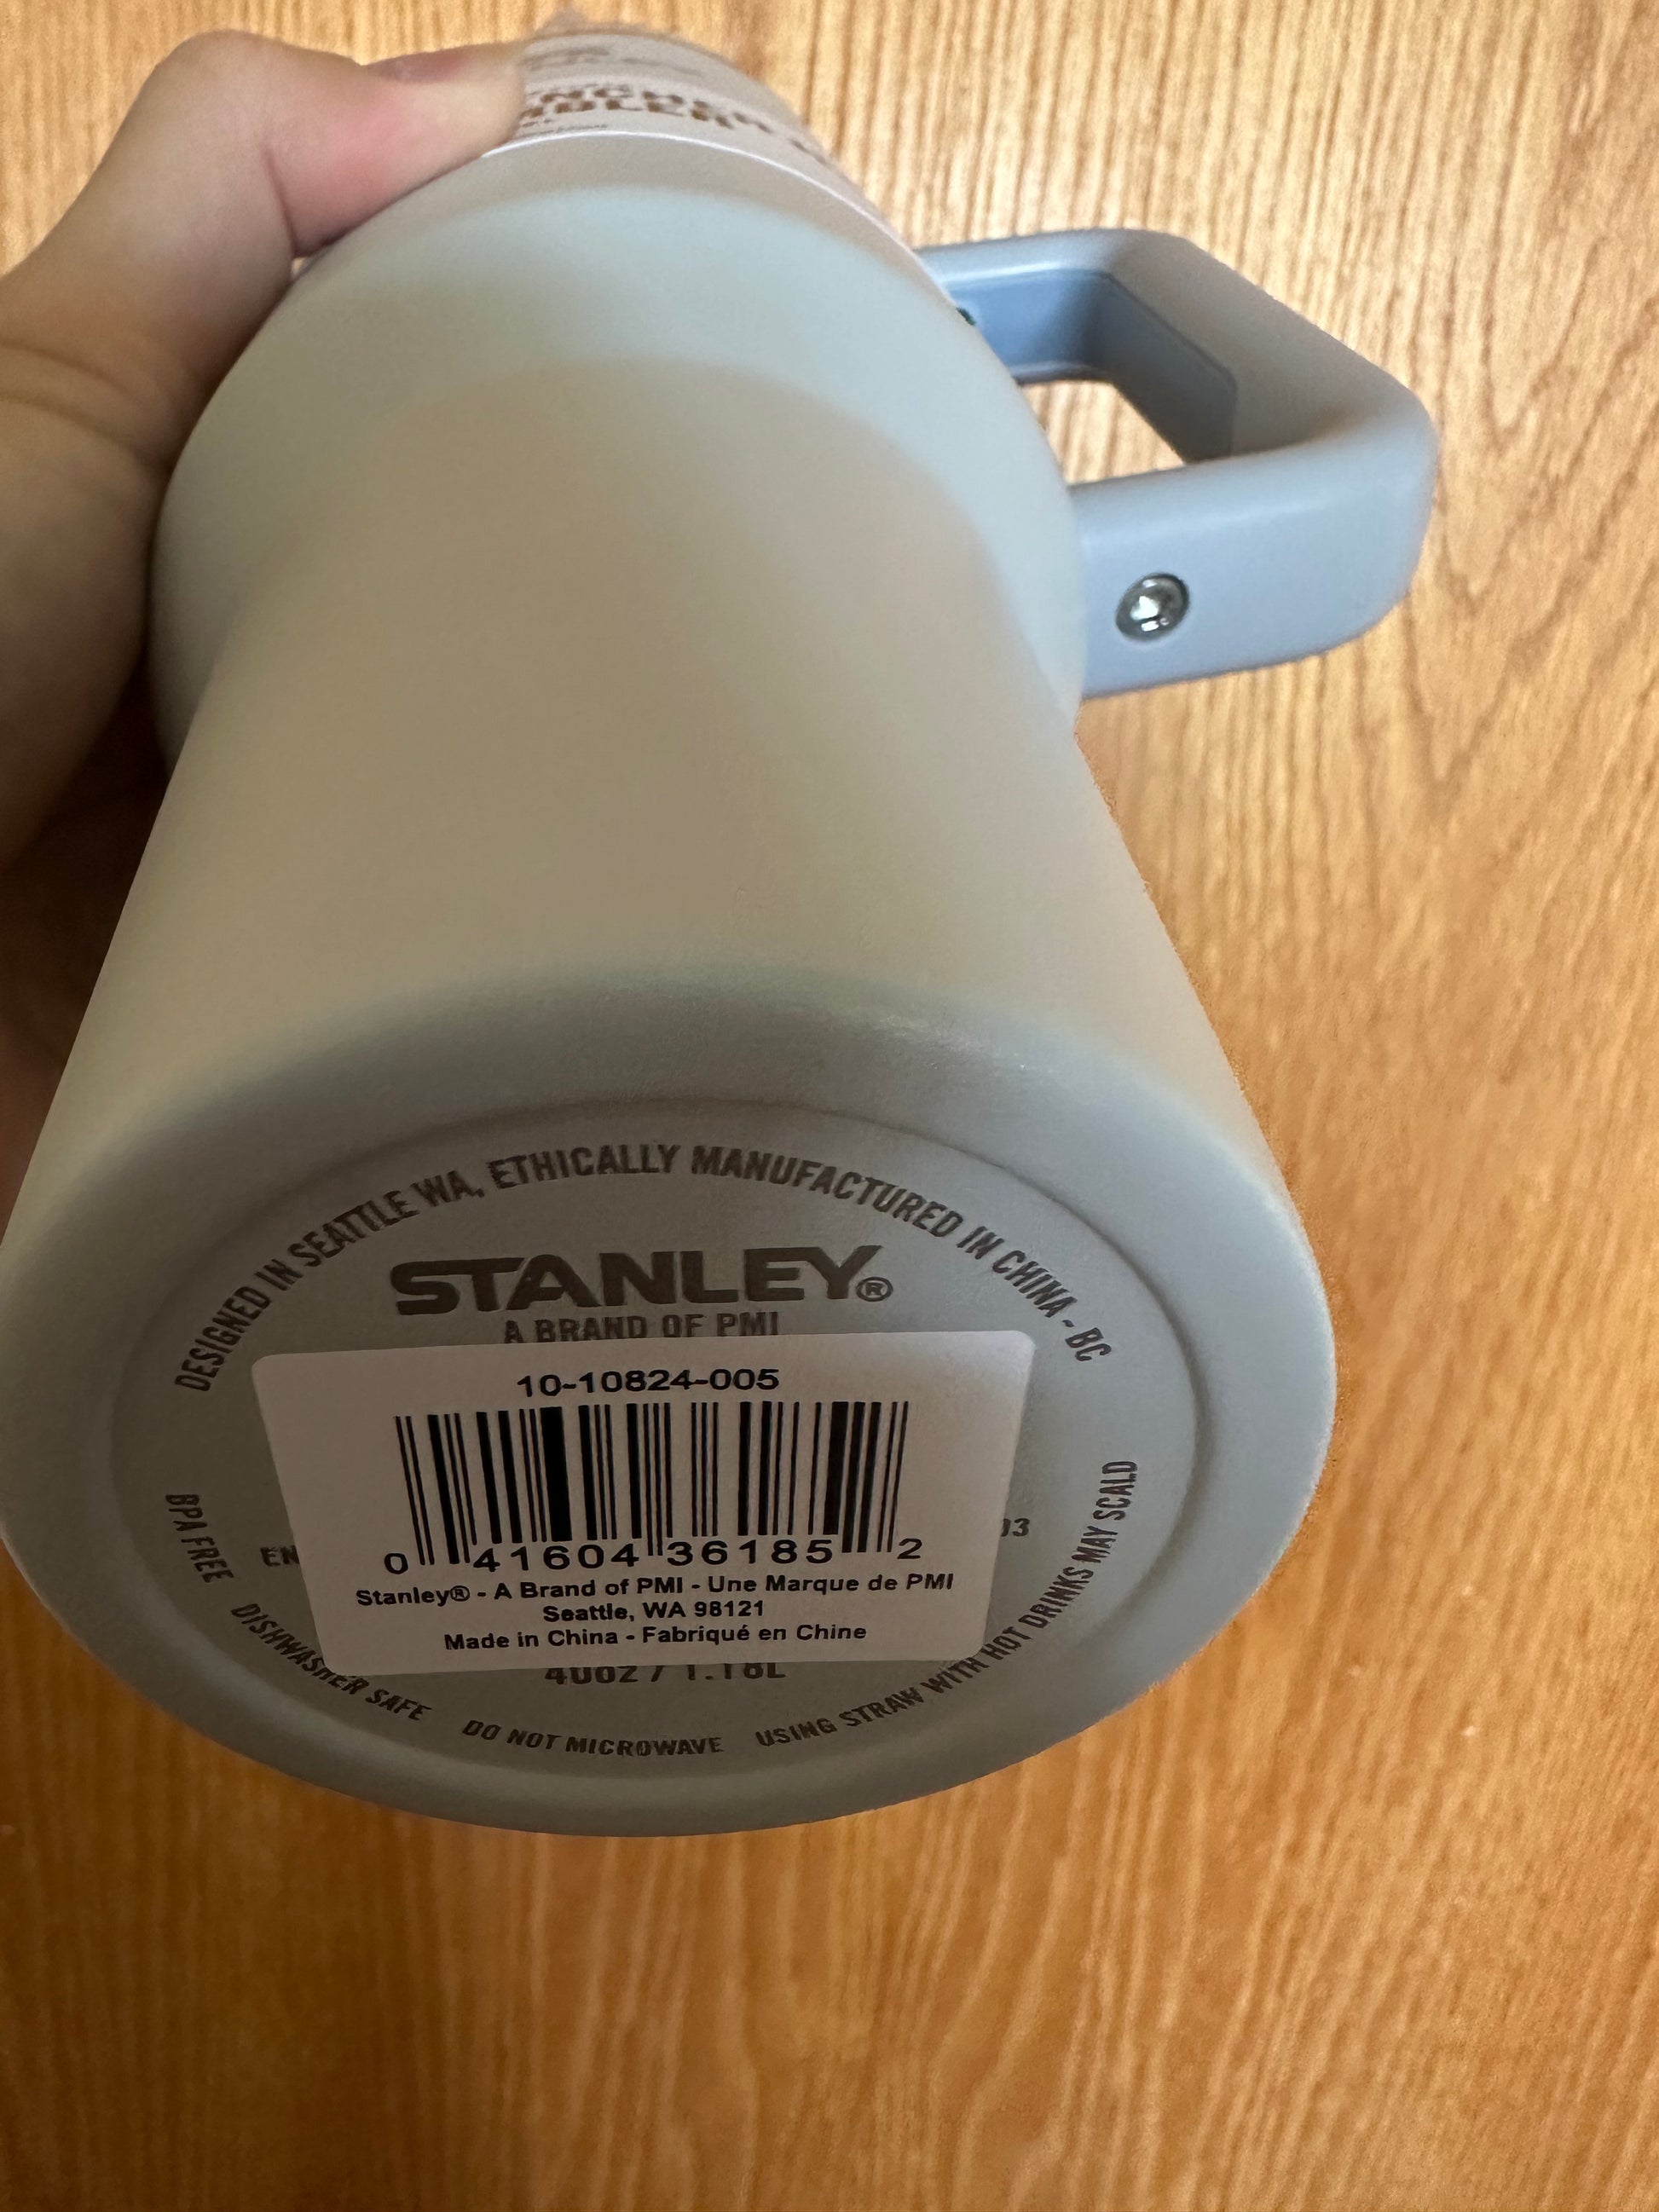 Brand New Stanley 40oz quencher cup 2.0 in Fog